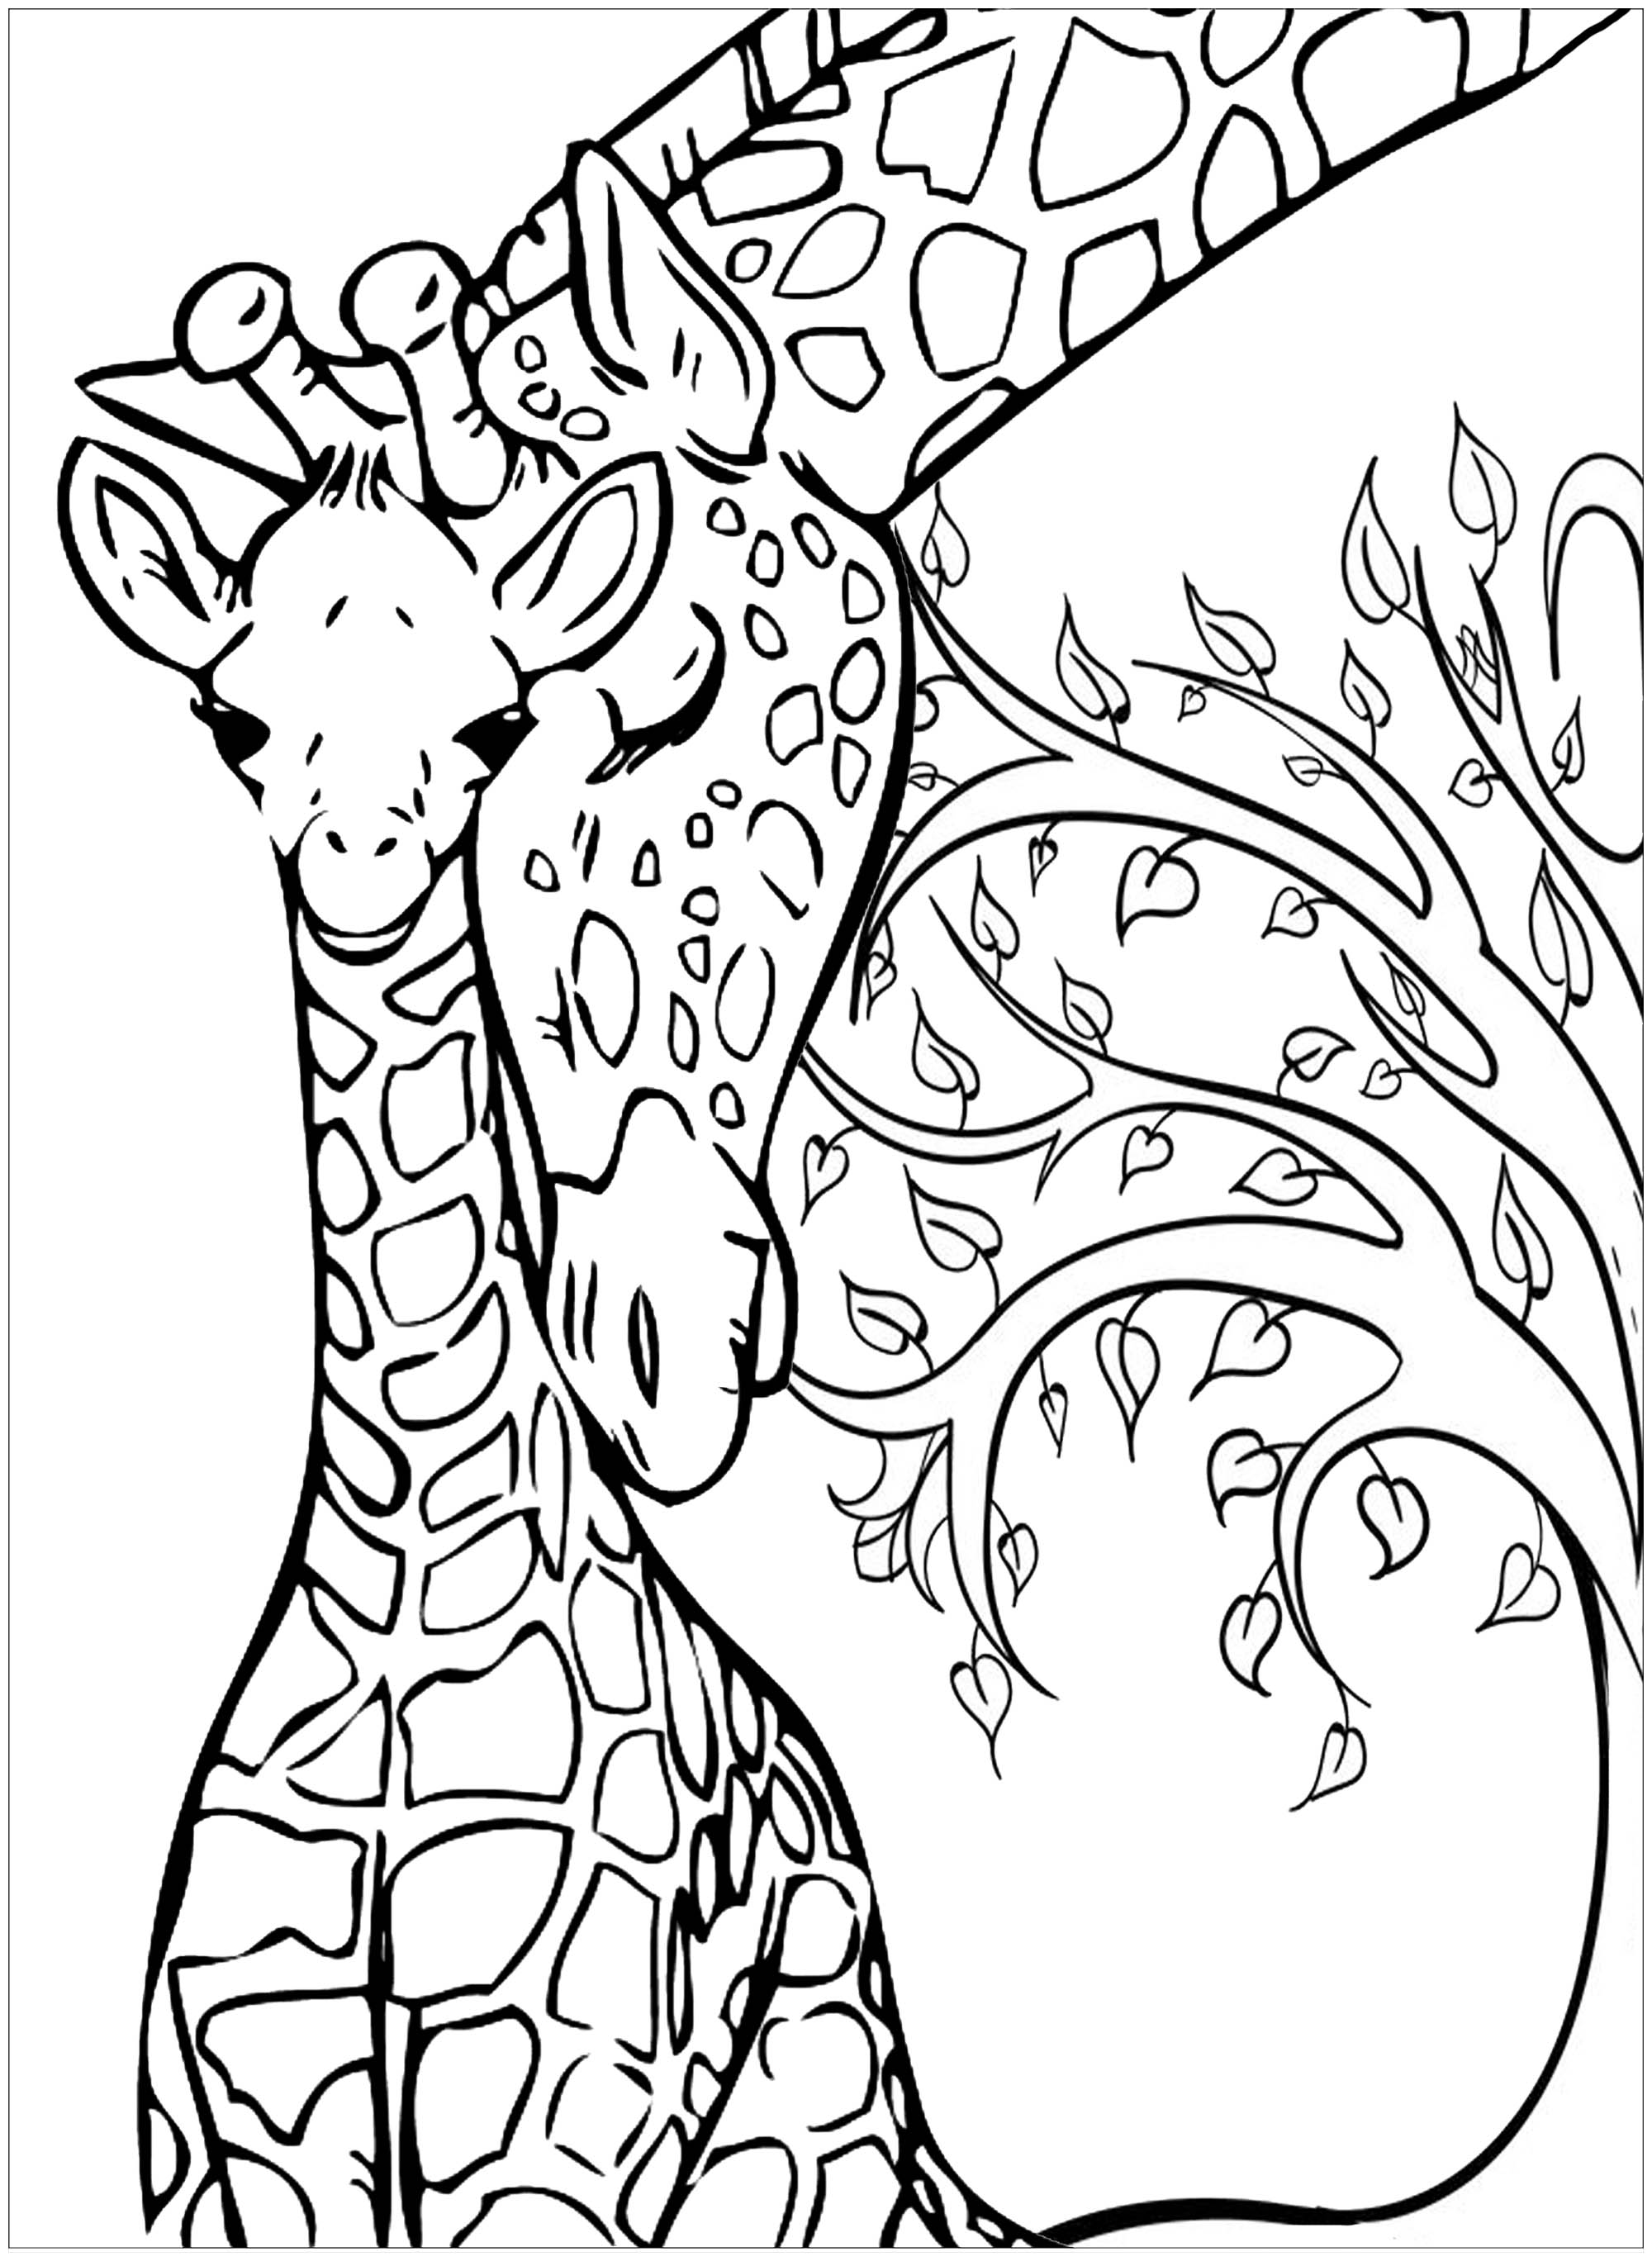 giraffe-pictures-to-color